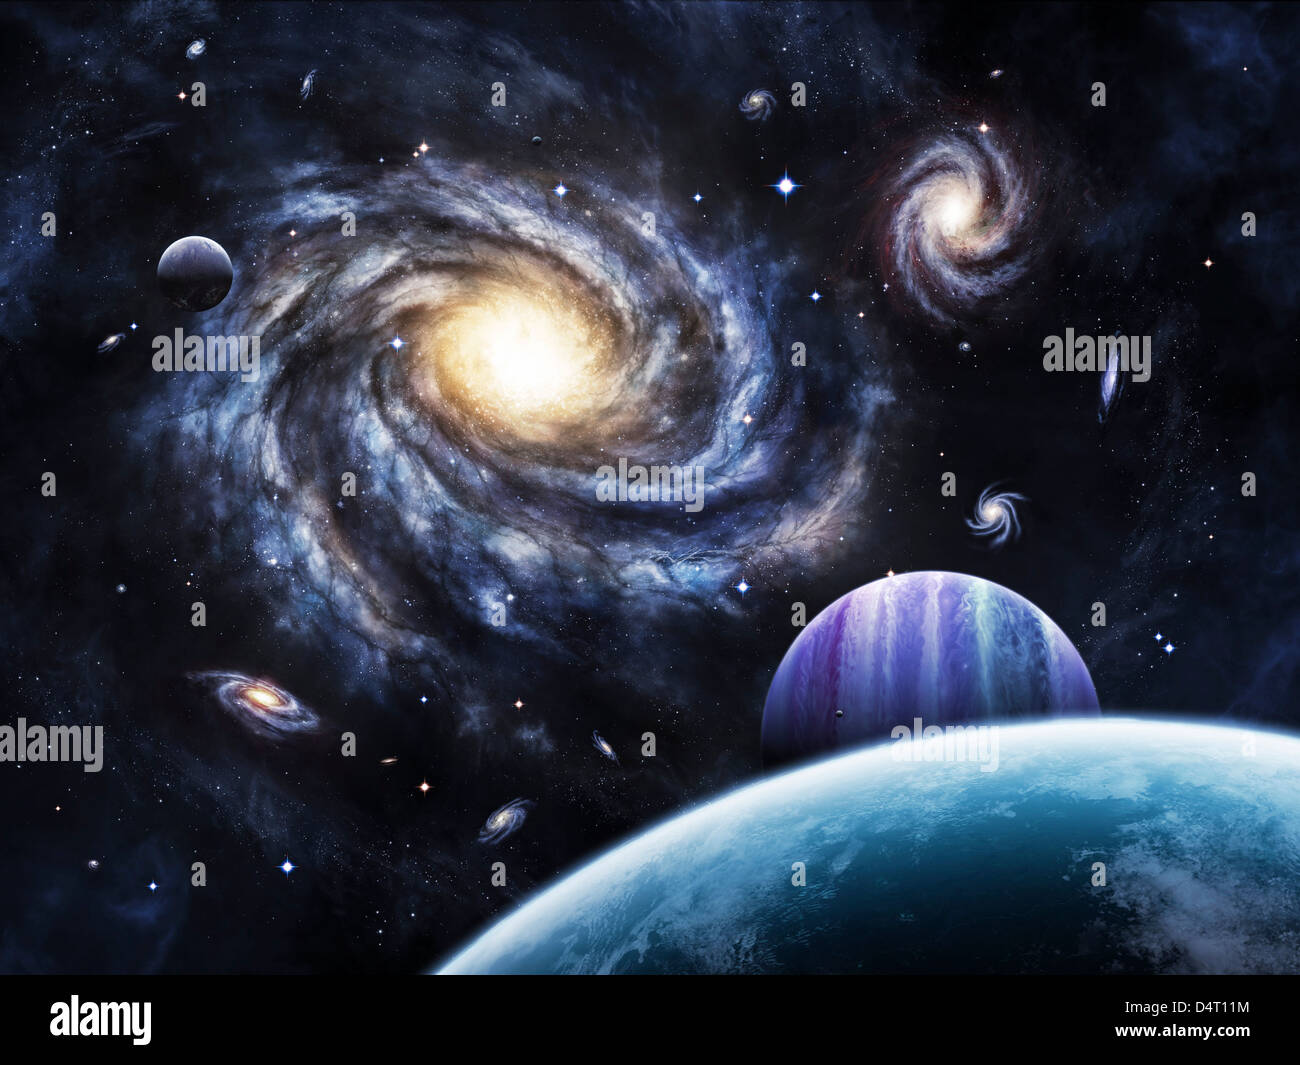 all planets in the galaxy